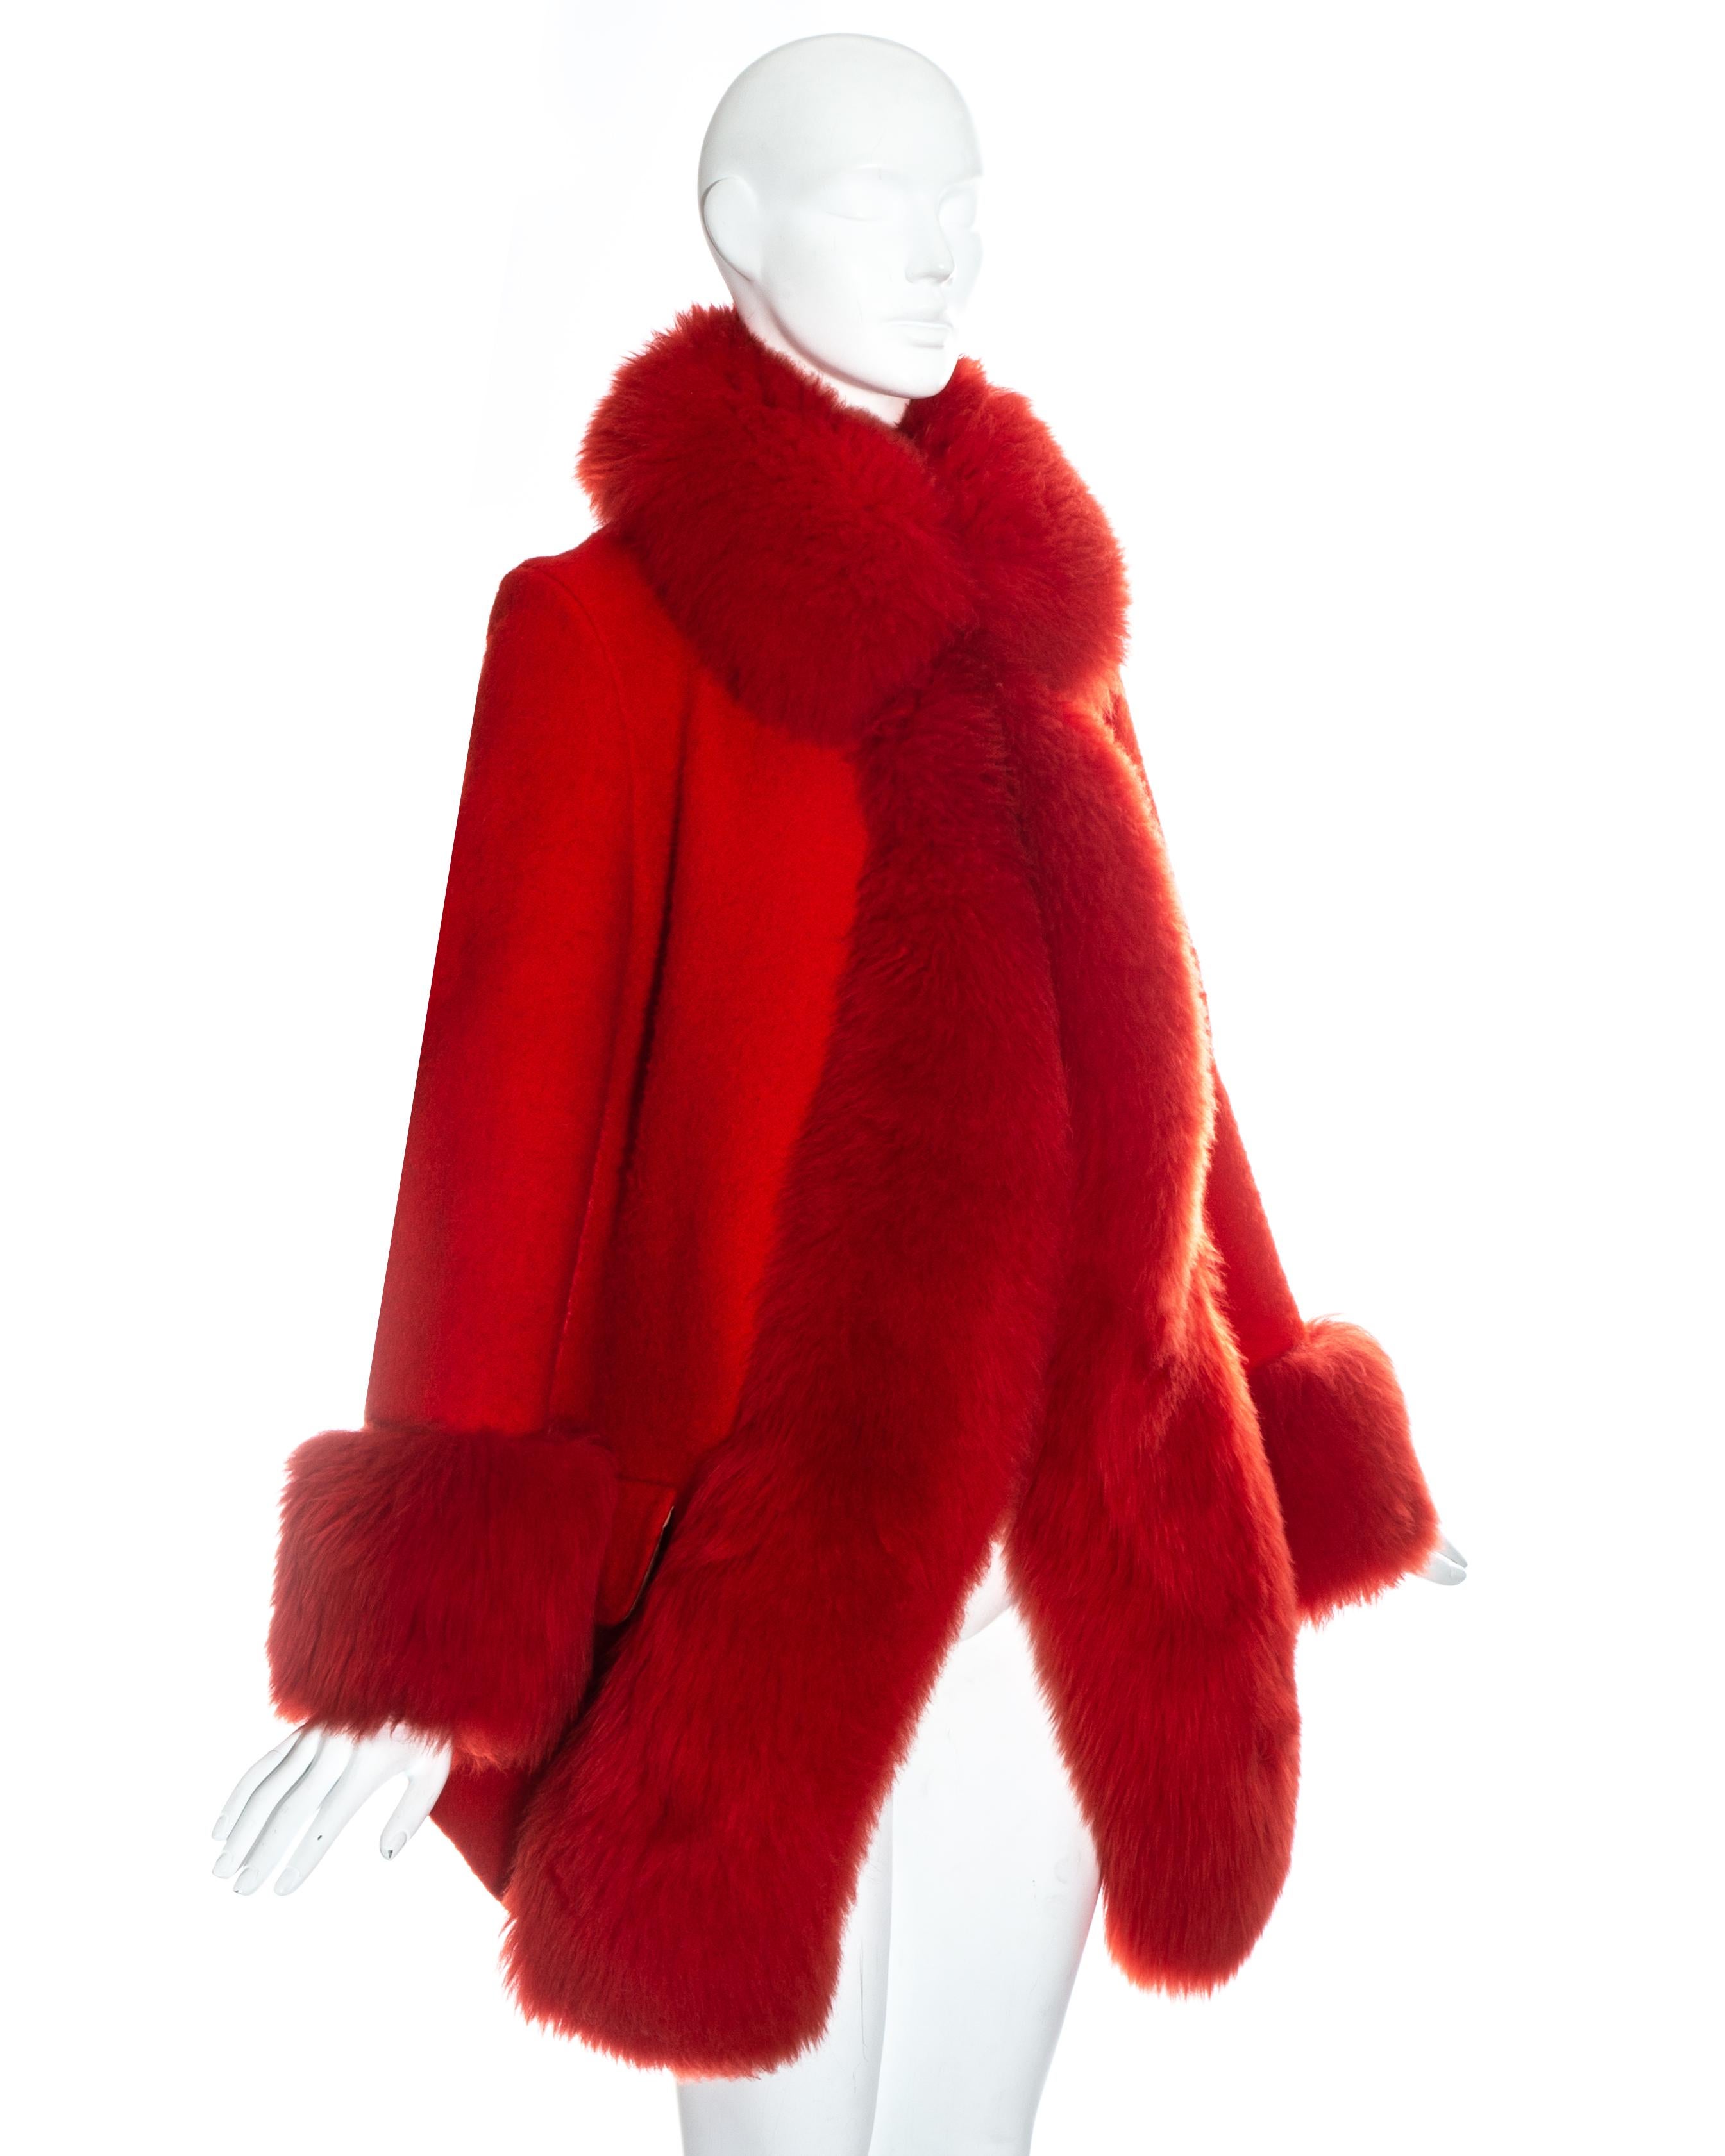 Vivienne Westwood red wool coat with oversized shearling cuffs, collar and trim. 

Fall-Winter 1994